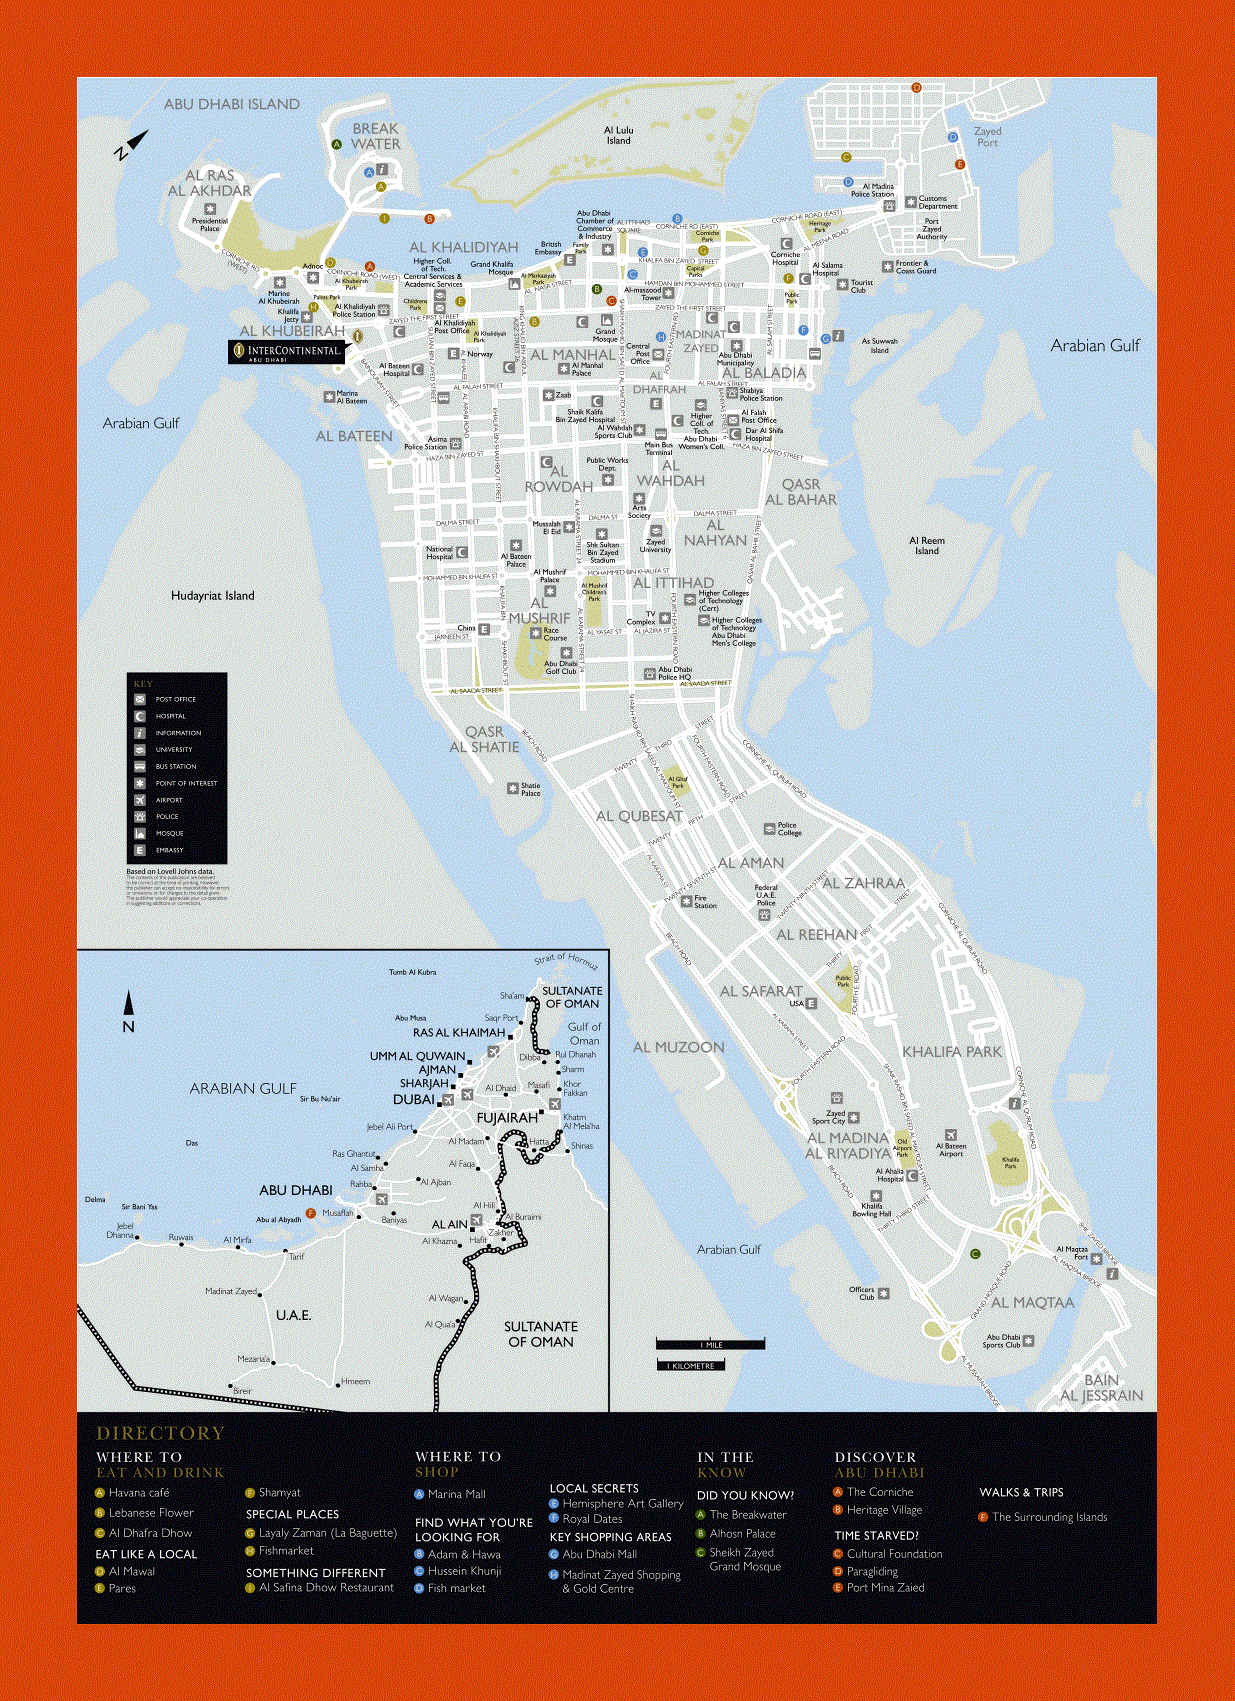 Road and tourist map of Abu Dhabi city